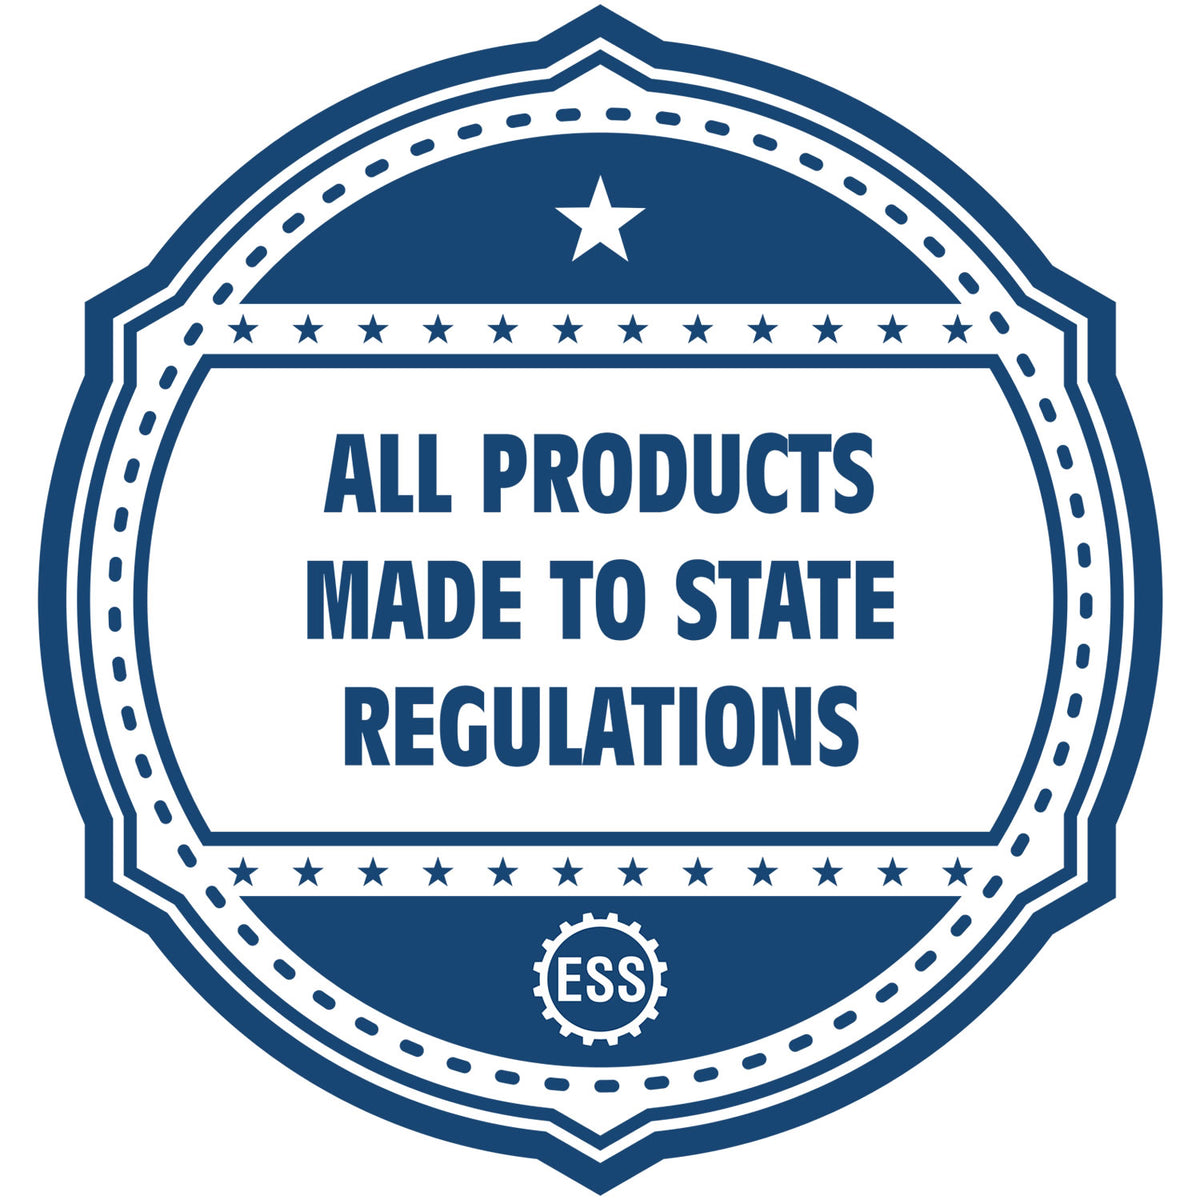 A blue icon or badge for the Self-Inking Michigan Geologist Stamp showing that this product is made in compliance with state regulations.